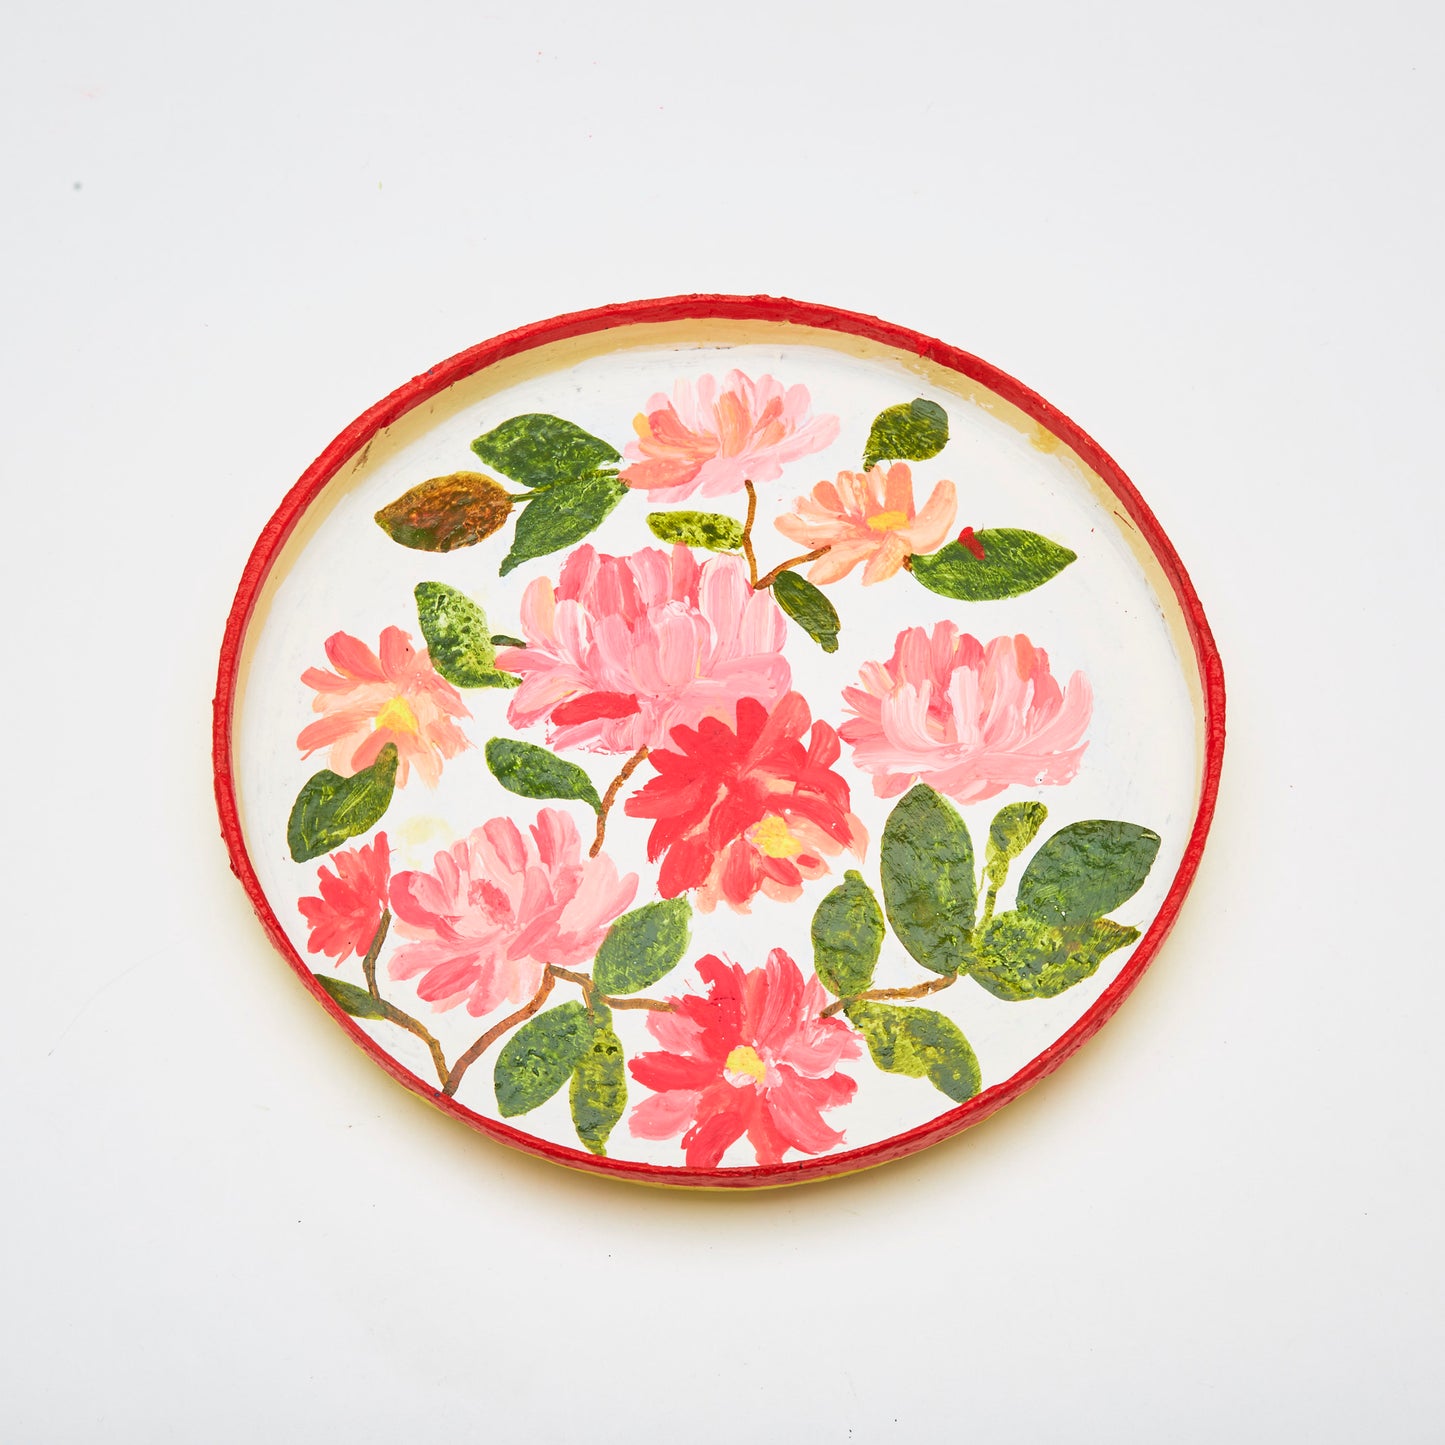 Blush Red & White with Flower Design - Thali Small